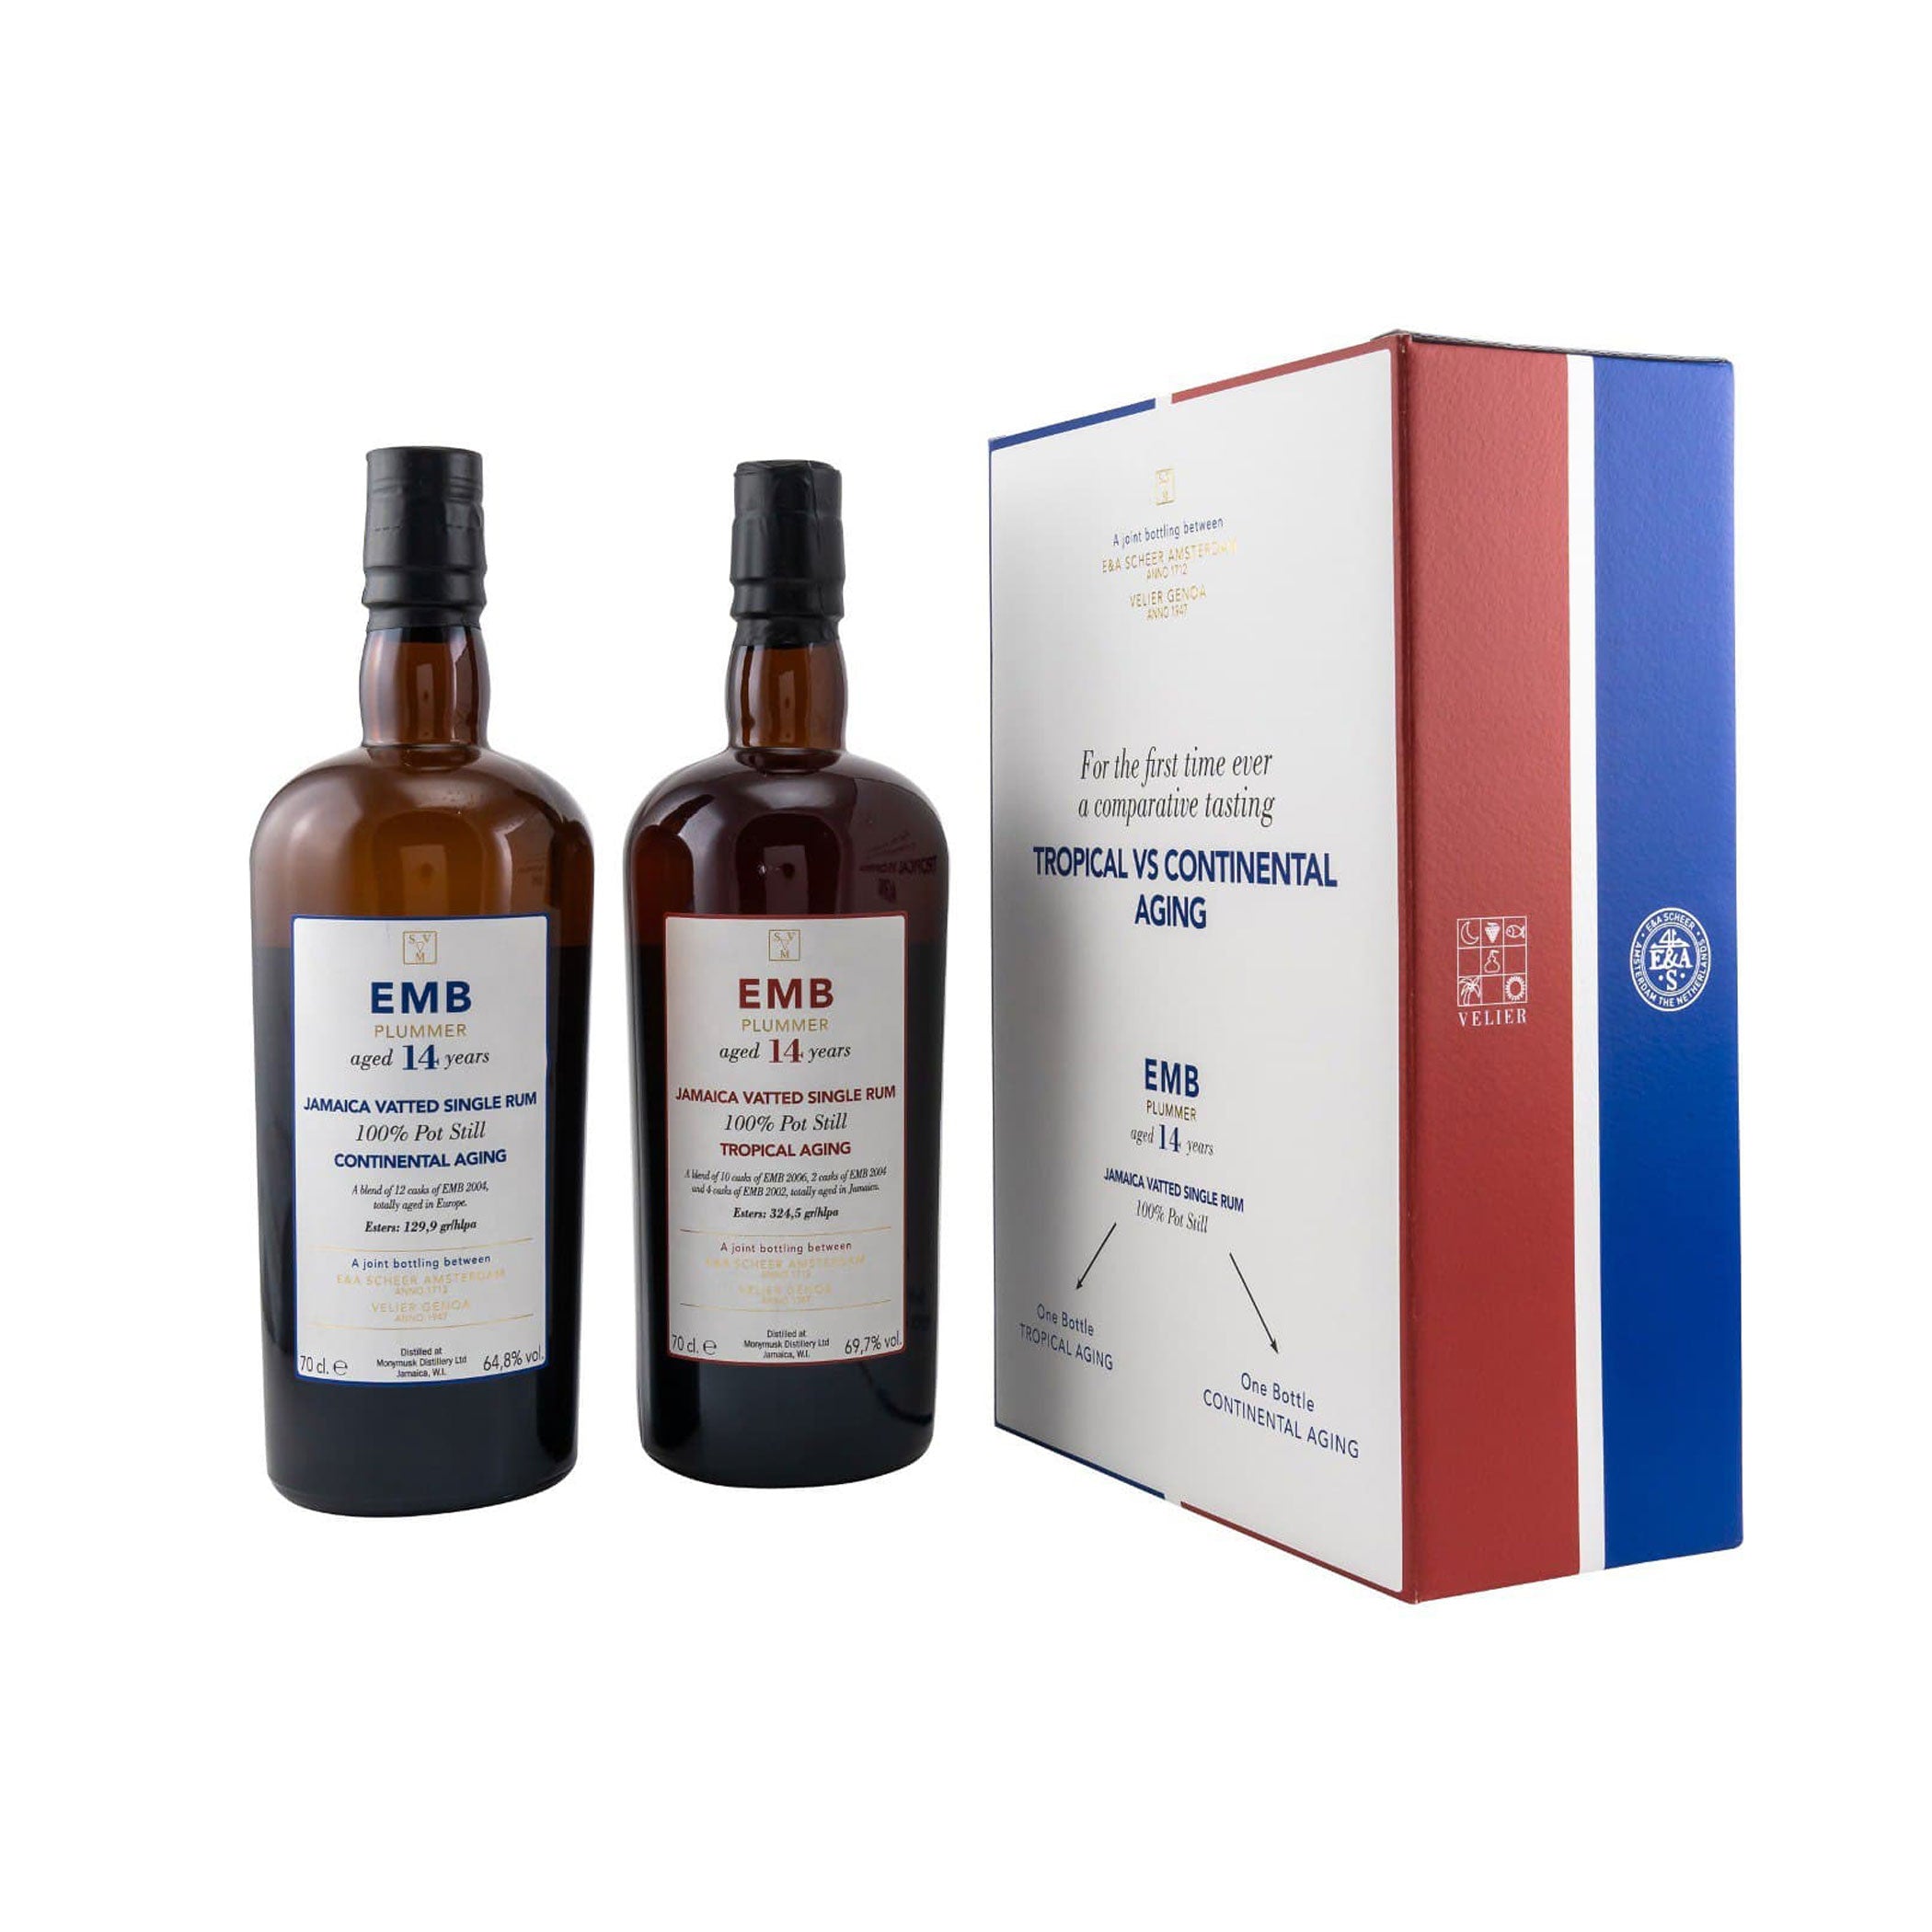 EMB Plummer 14 Years - Tropical vs Continental Aging - Comparative Tasting Set - 2 Bottles - Scheer Velier Main Jamaica Vatted Single Rum